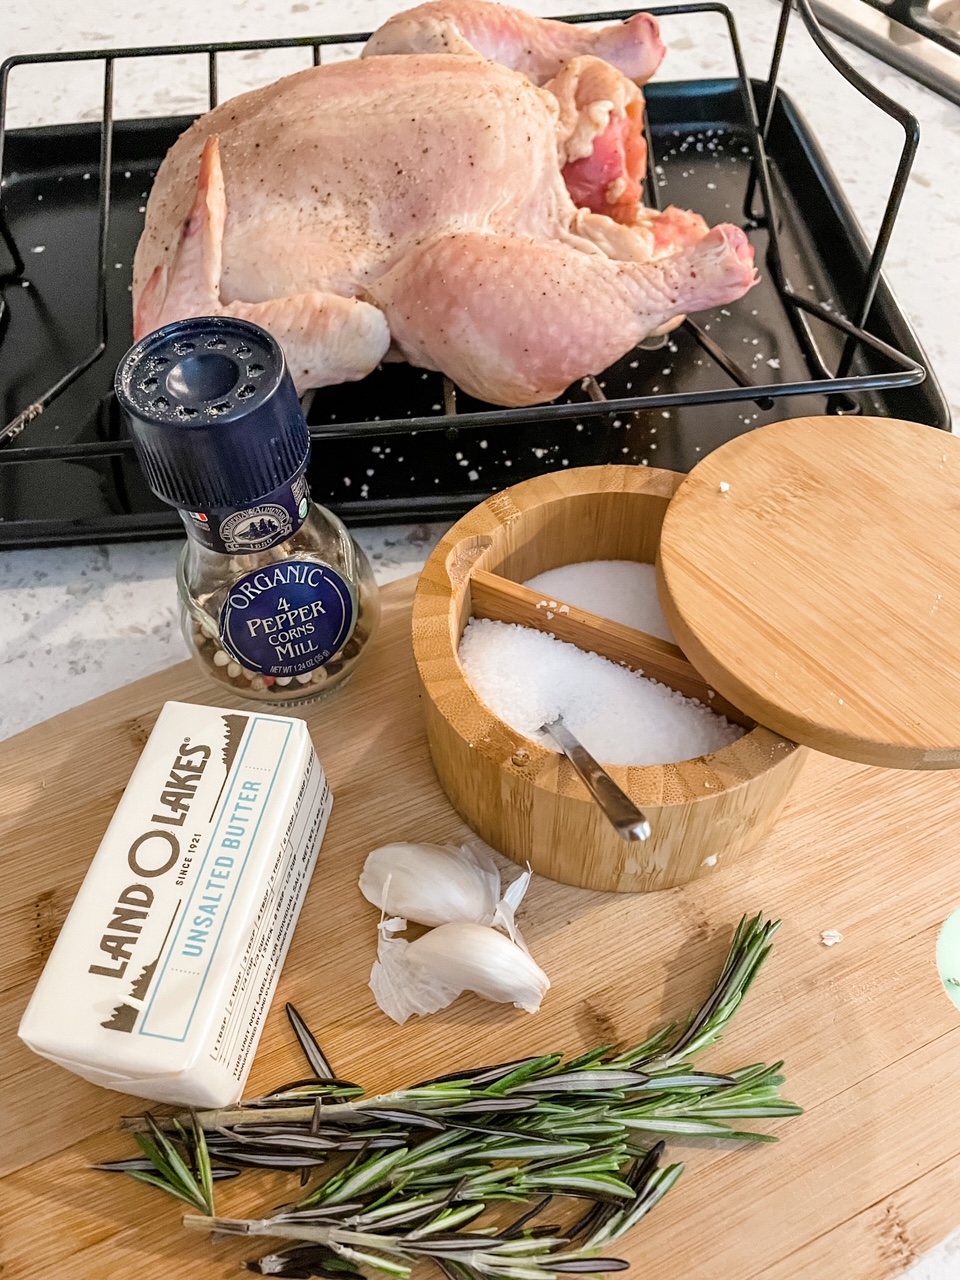 The ingredients for the Basic Herb-Roasted Chicken laid out on a wooden cutting board.